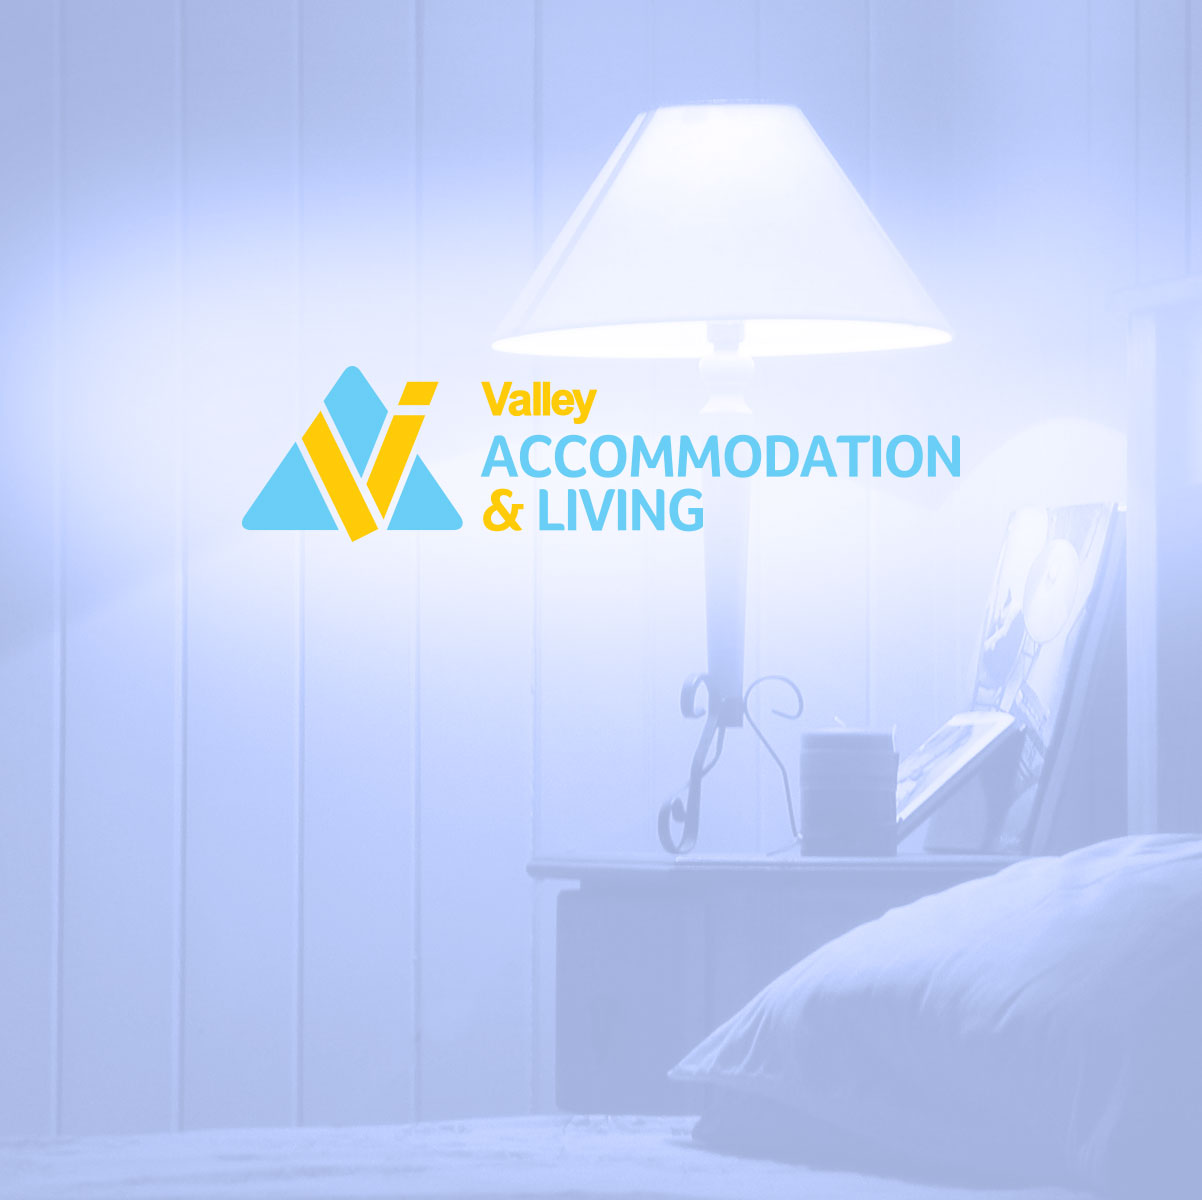 Accommodation & Living Services